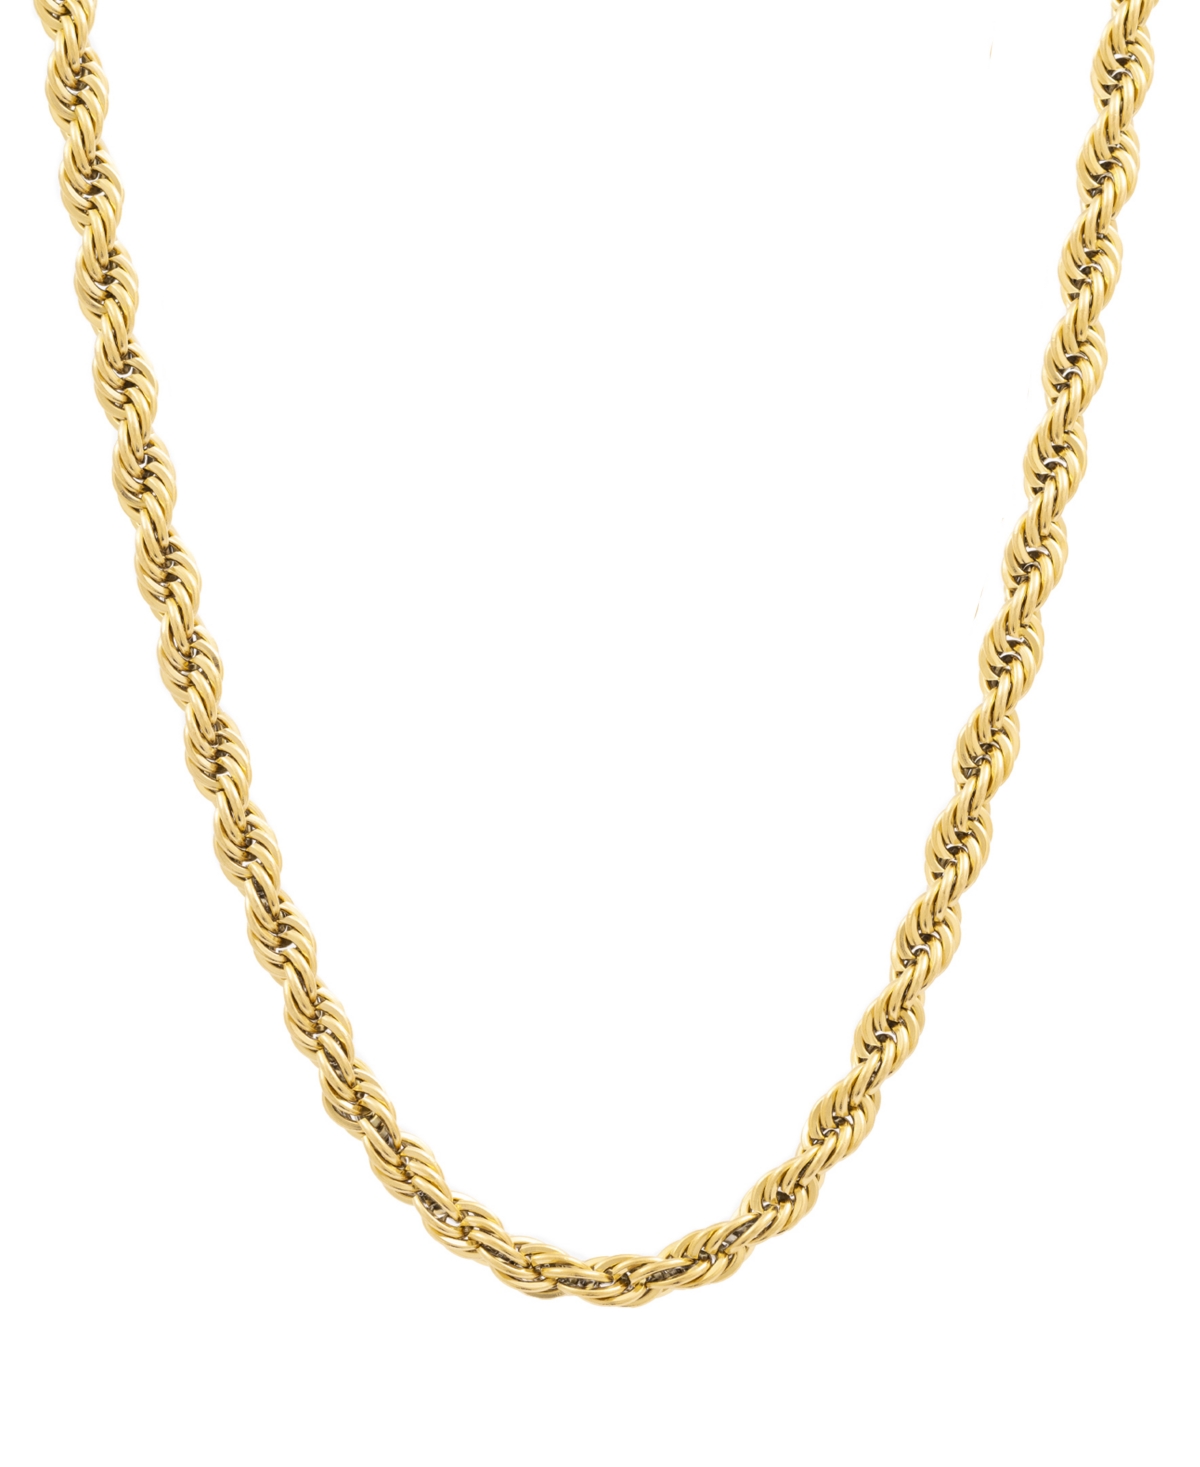 Shop Legacy For Men By Simone I. Smith Men's Rope Link 24" Chain Necklace In Gold-tone Ion-plated Stainless Steel